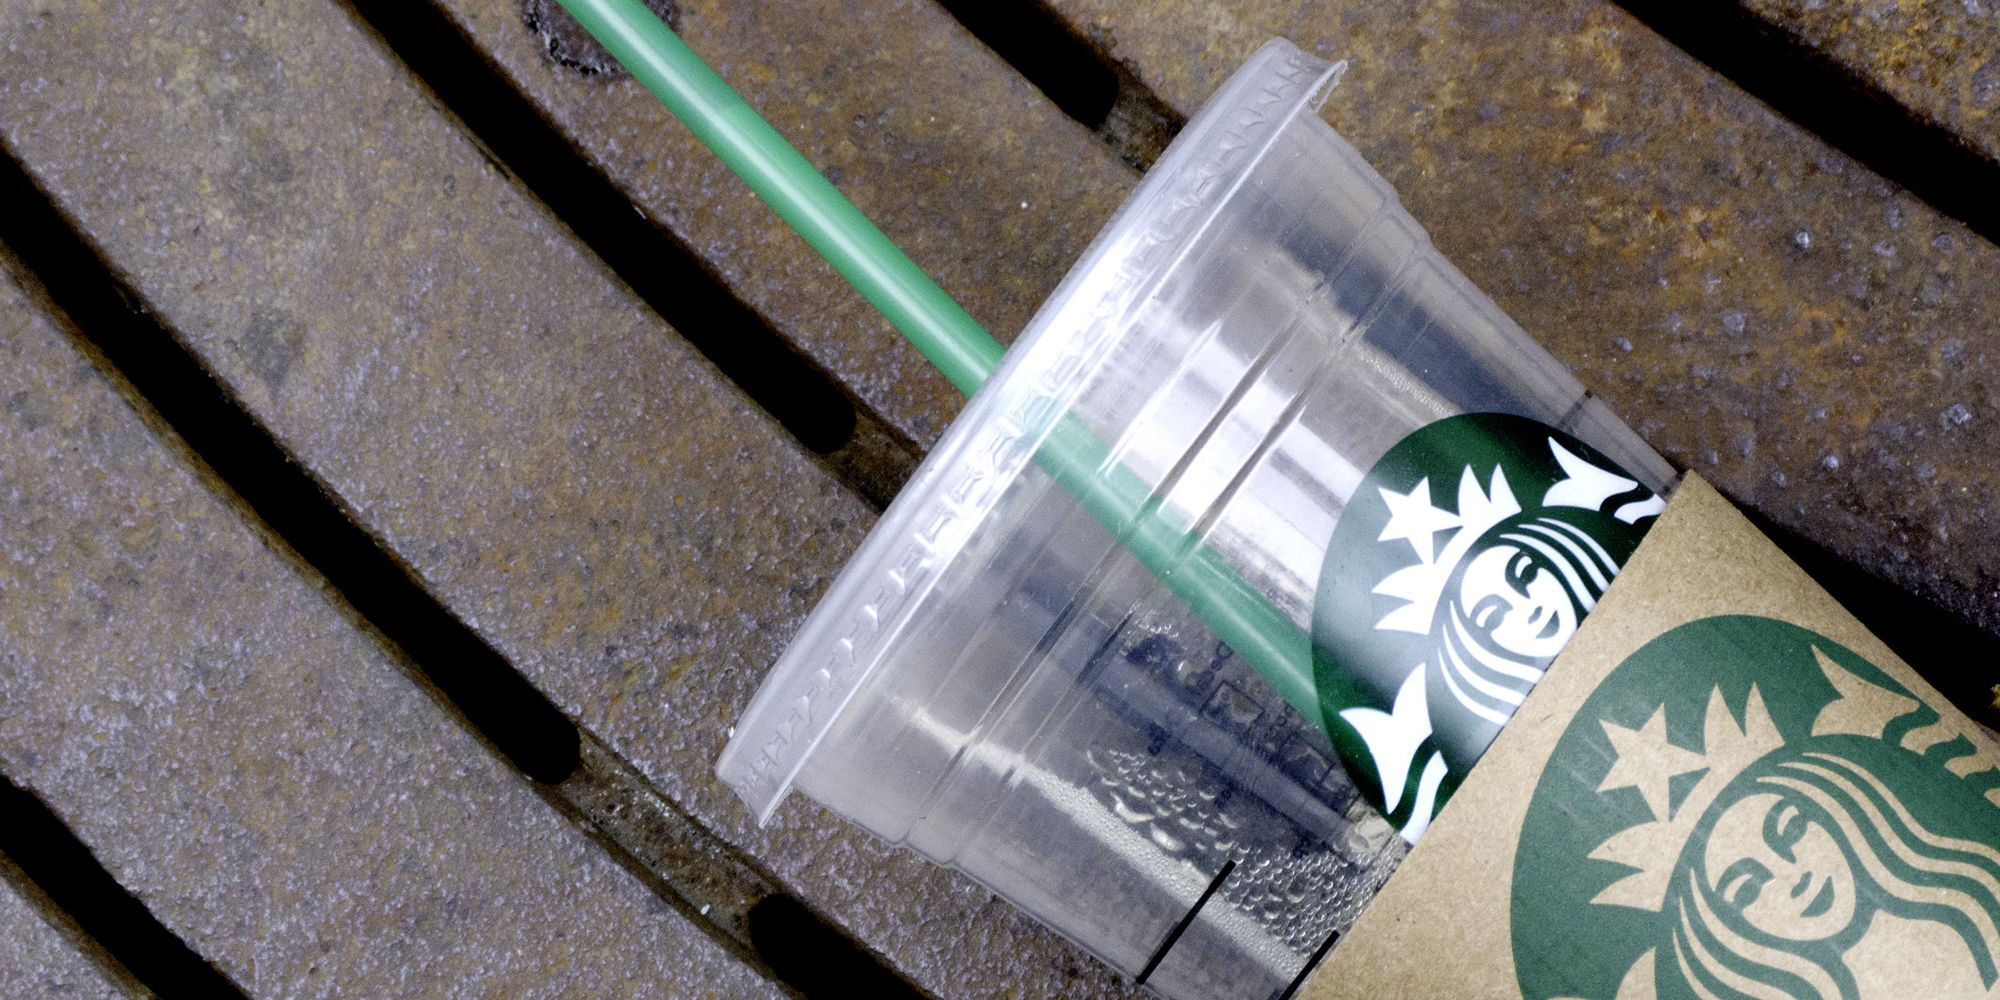 Starbucks to phase out single-use plastic straws for sippy cups